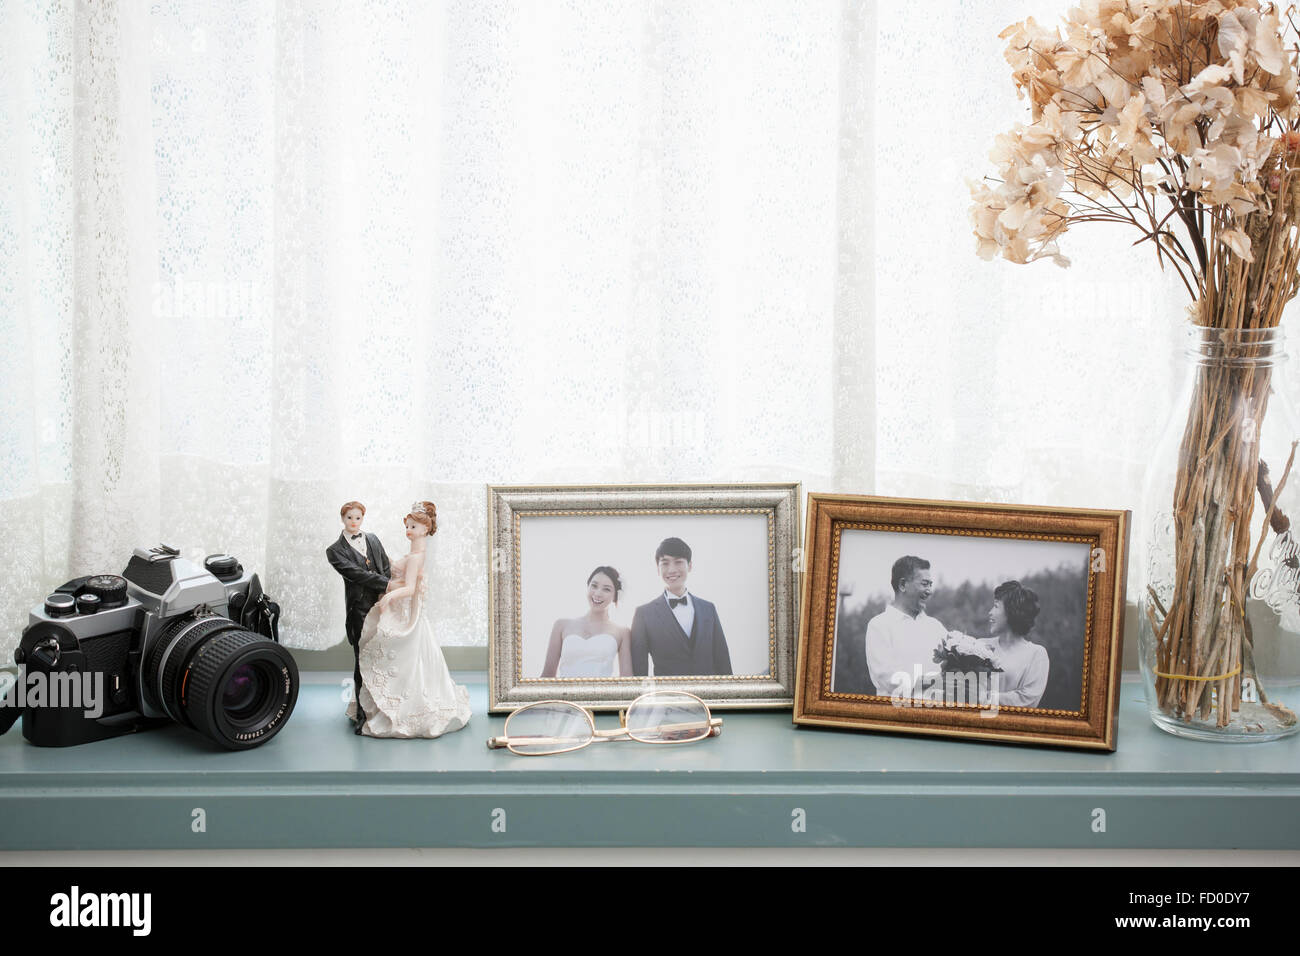 Old and new wedding photos in frames Stock Photo